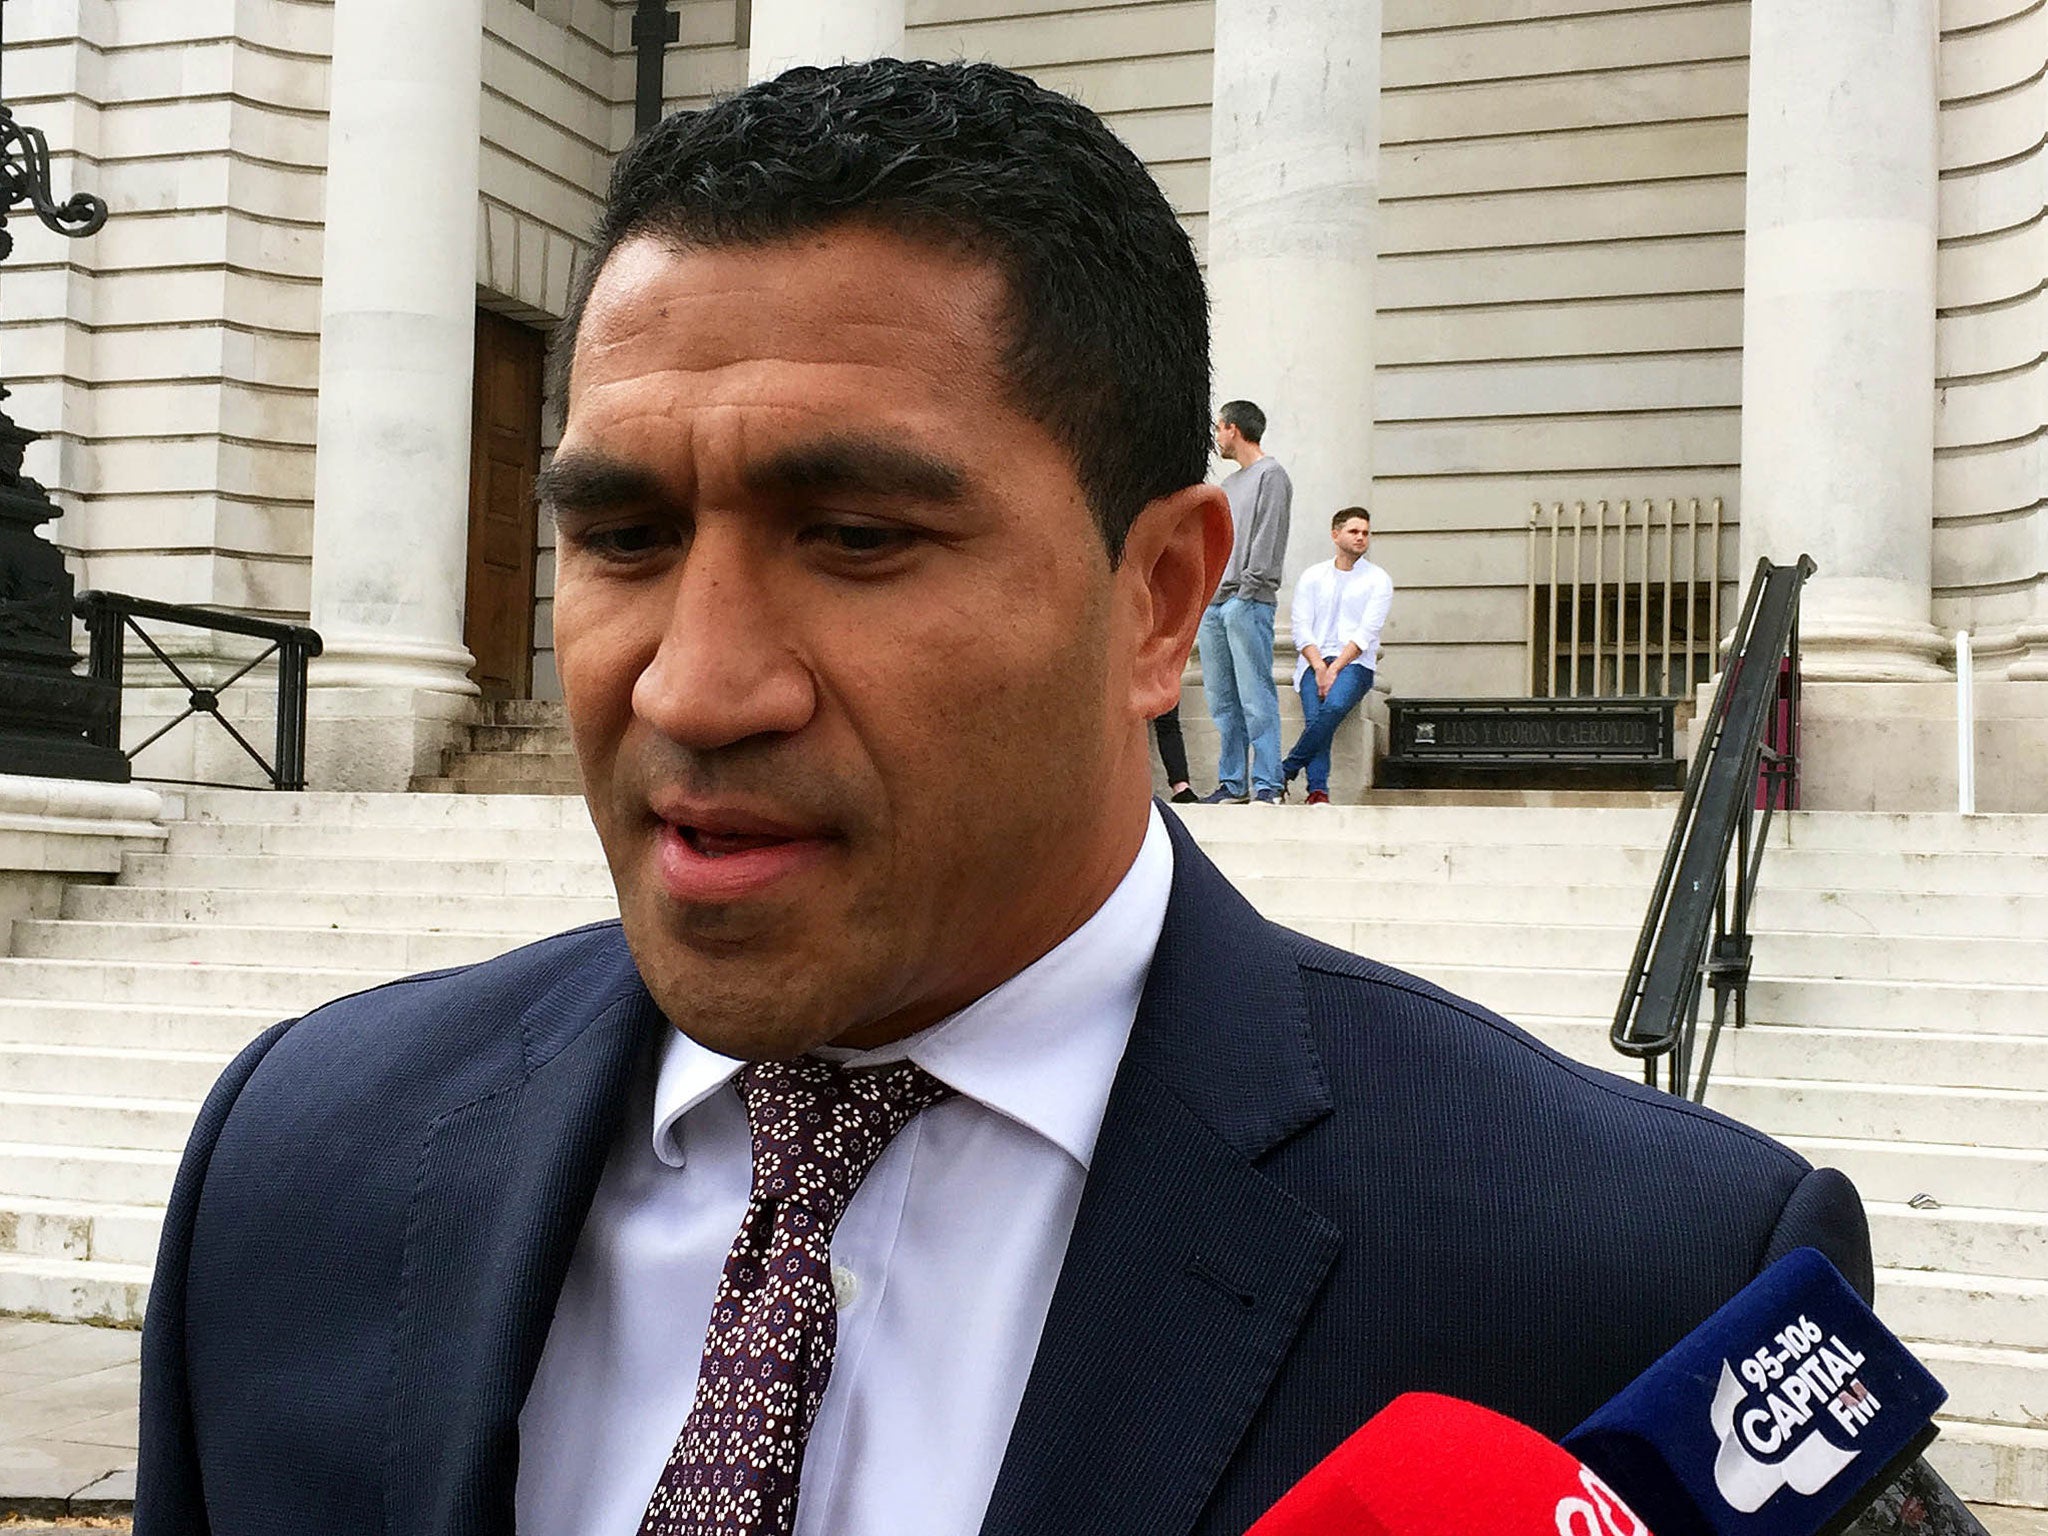 Mils Muliaina has had a case sexual assault case against him dropped